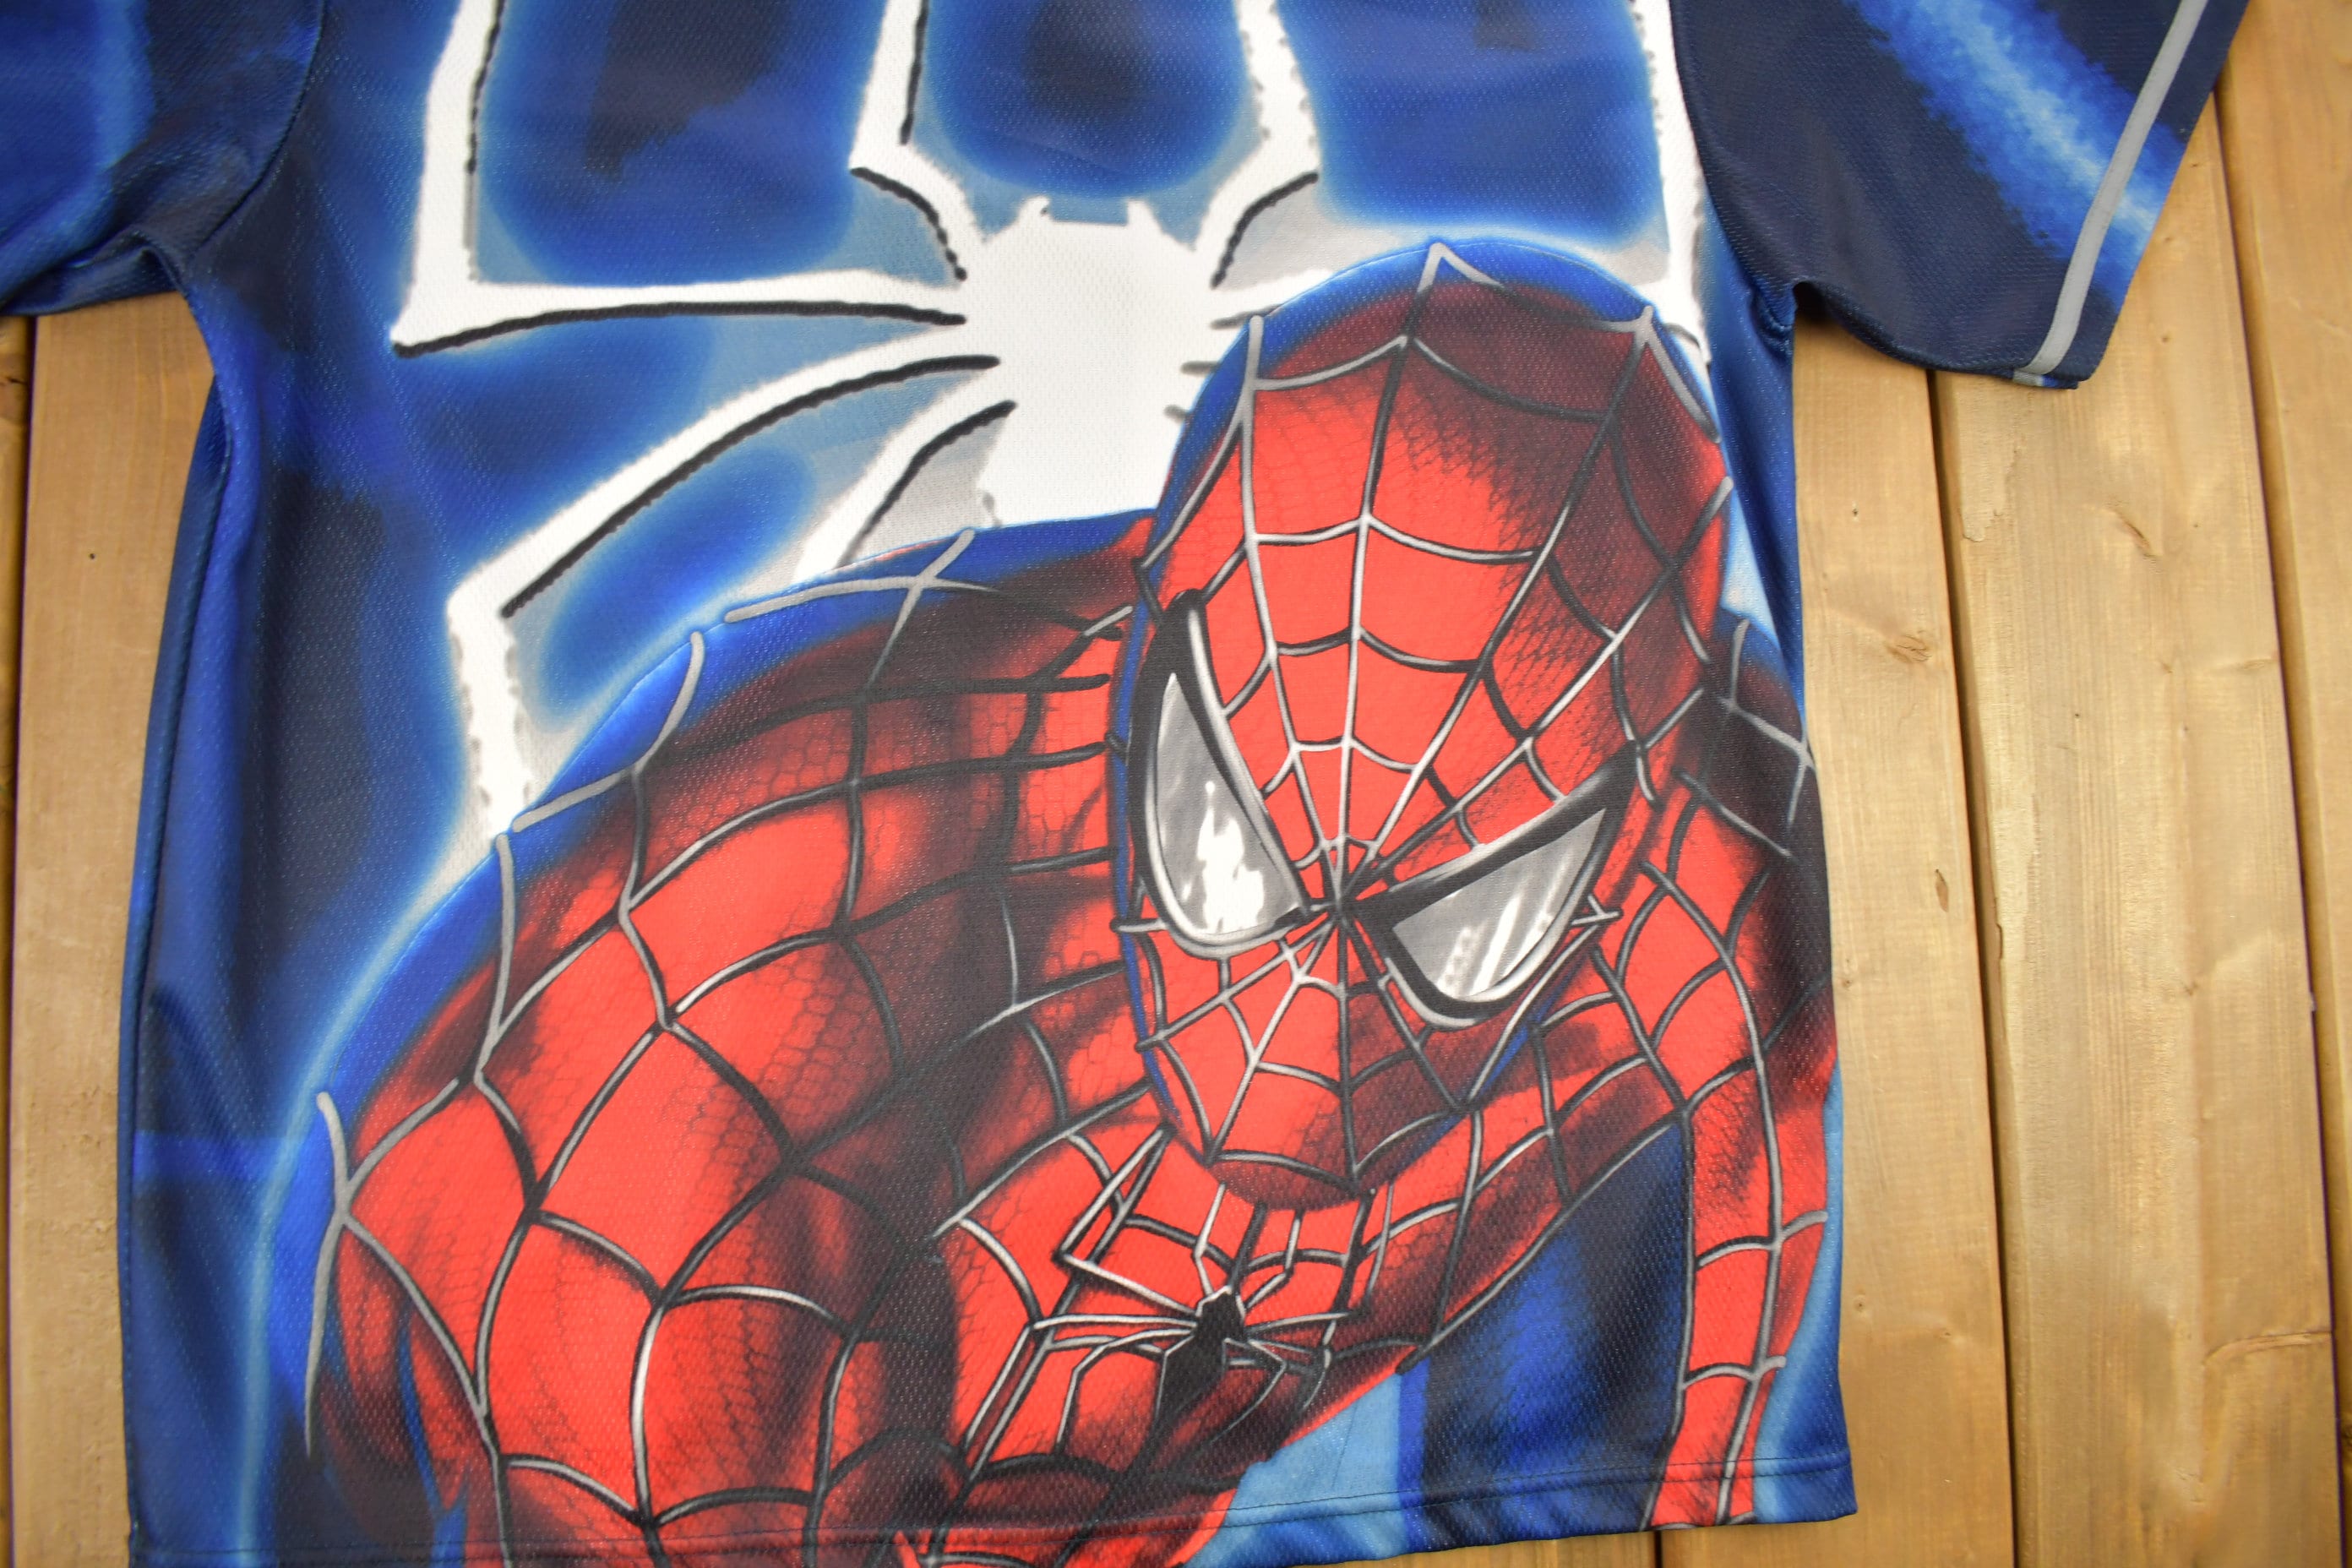 Vtg Spider-Man Marvel Comic Characters Negative Space T-Shirt 2002